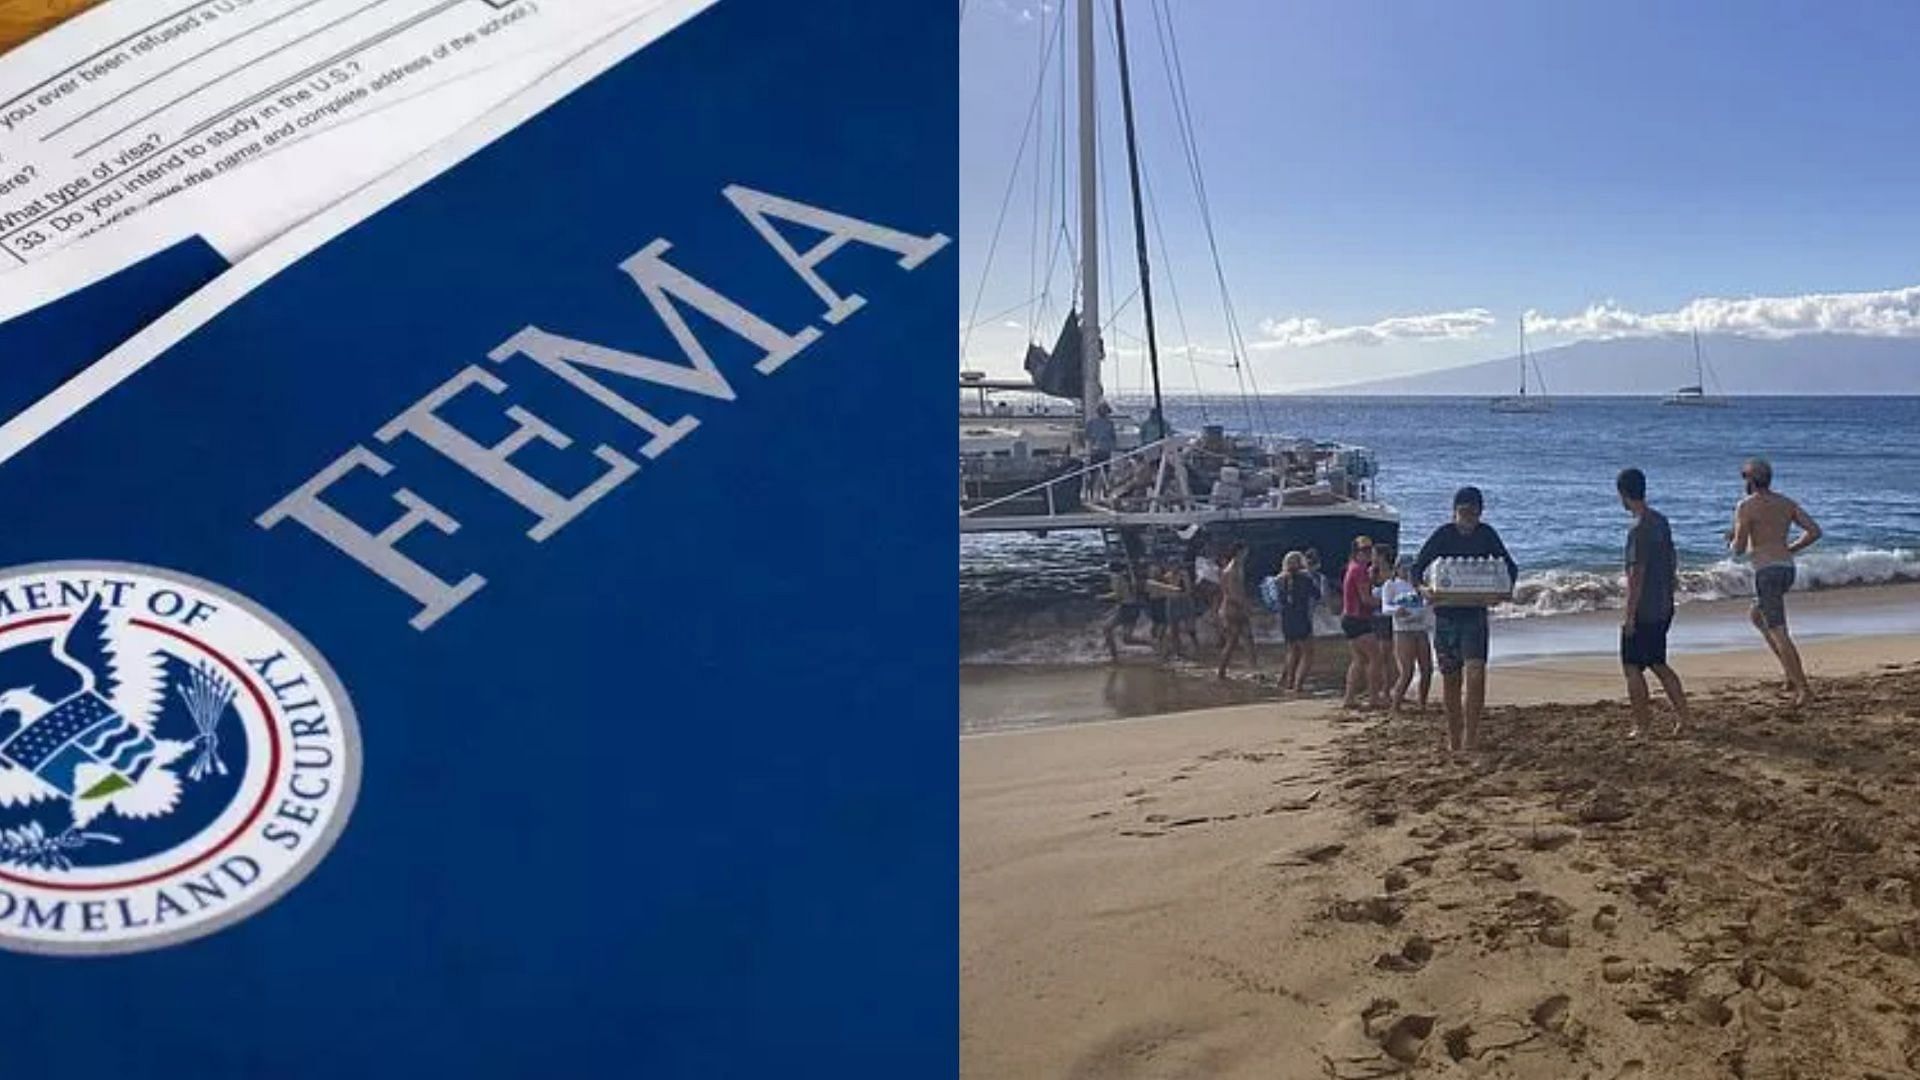 Claims of FEMA blocking insulin from Maui wildfire victims sparks outrage online. (Image via Shutterstock, AP)